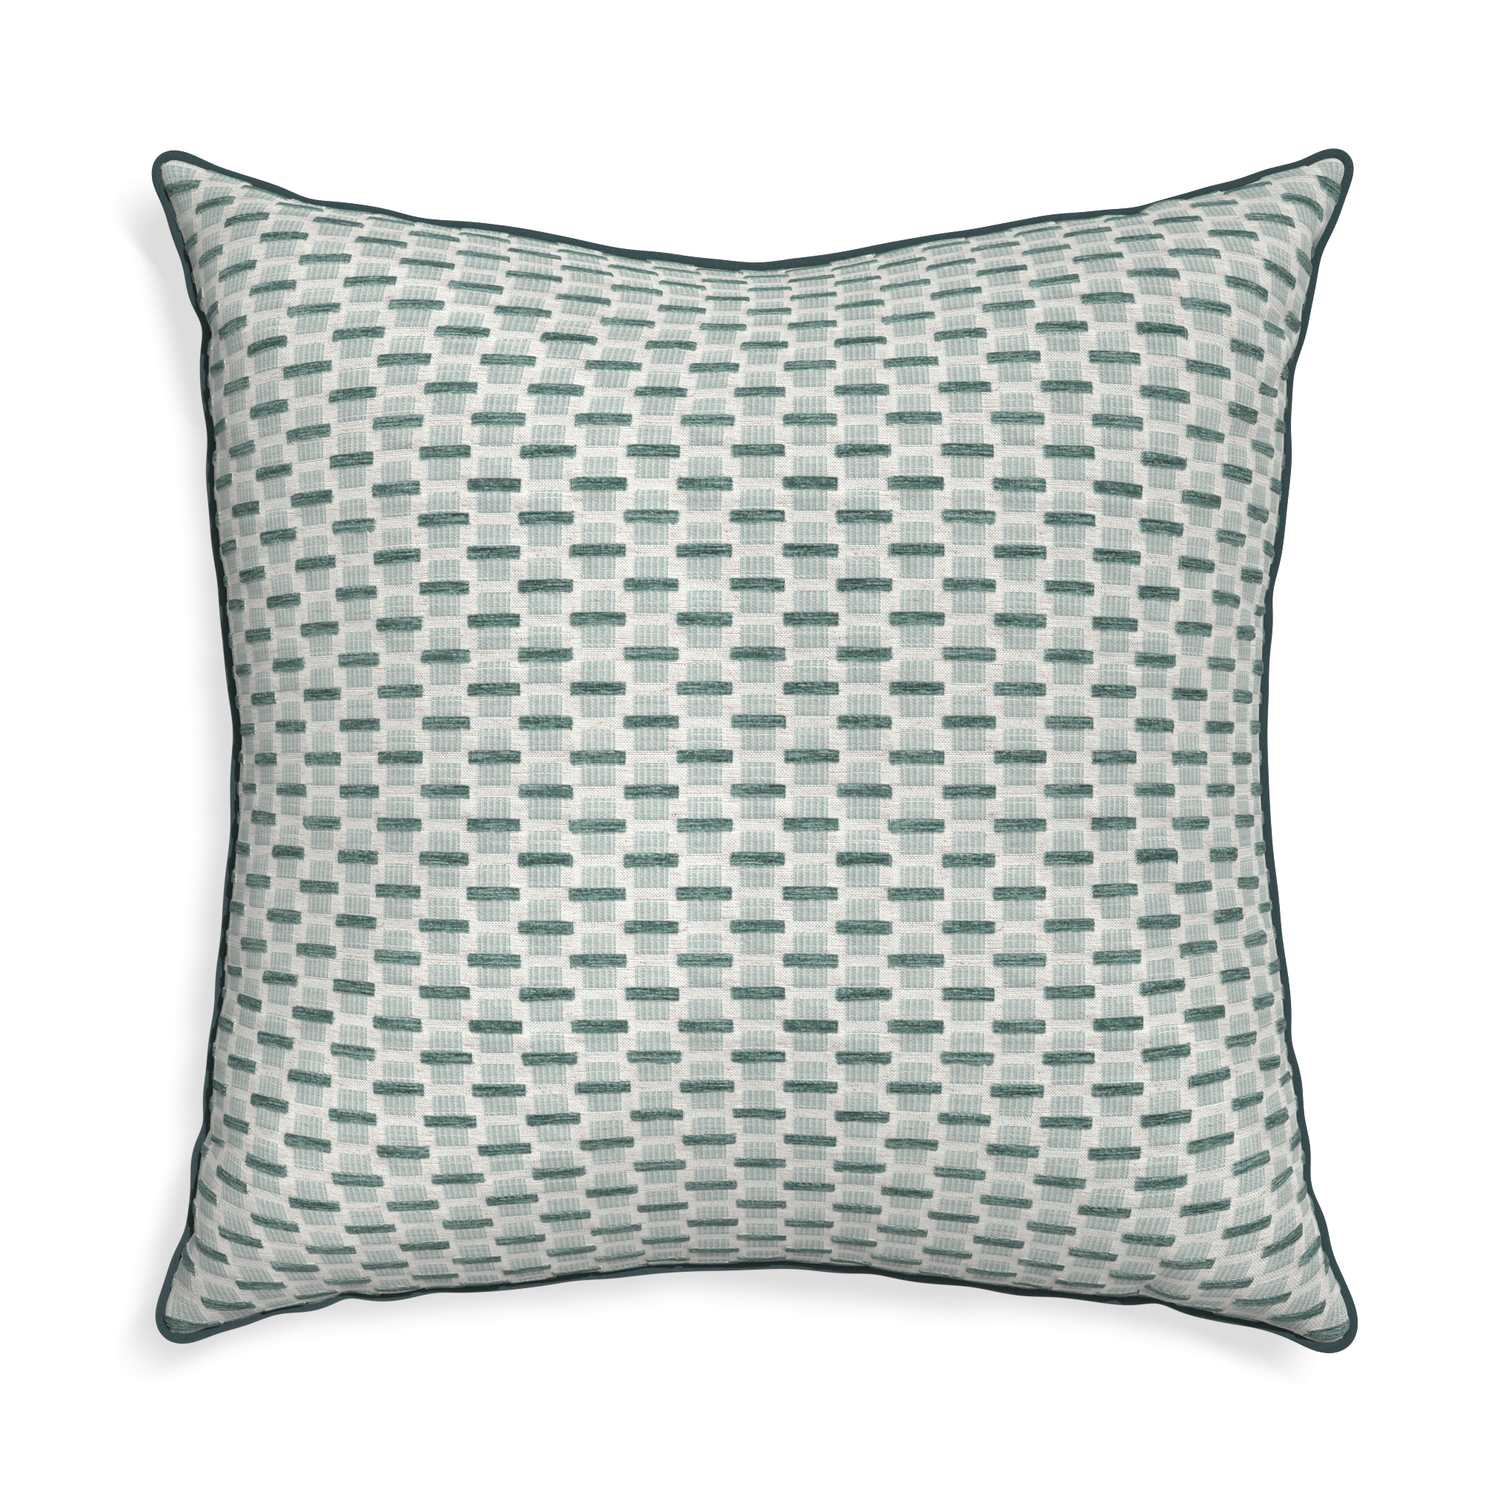 Euro-sham willow mint custom green geometric chenillepillow with p piping on white background